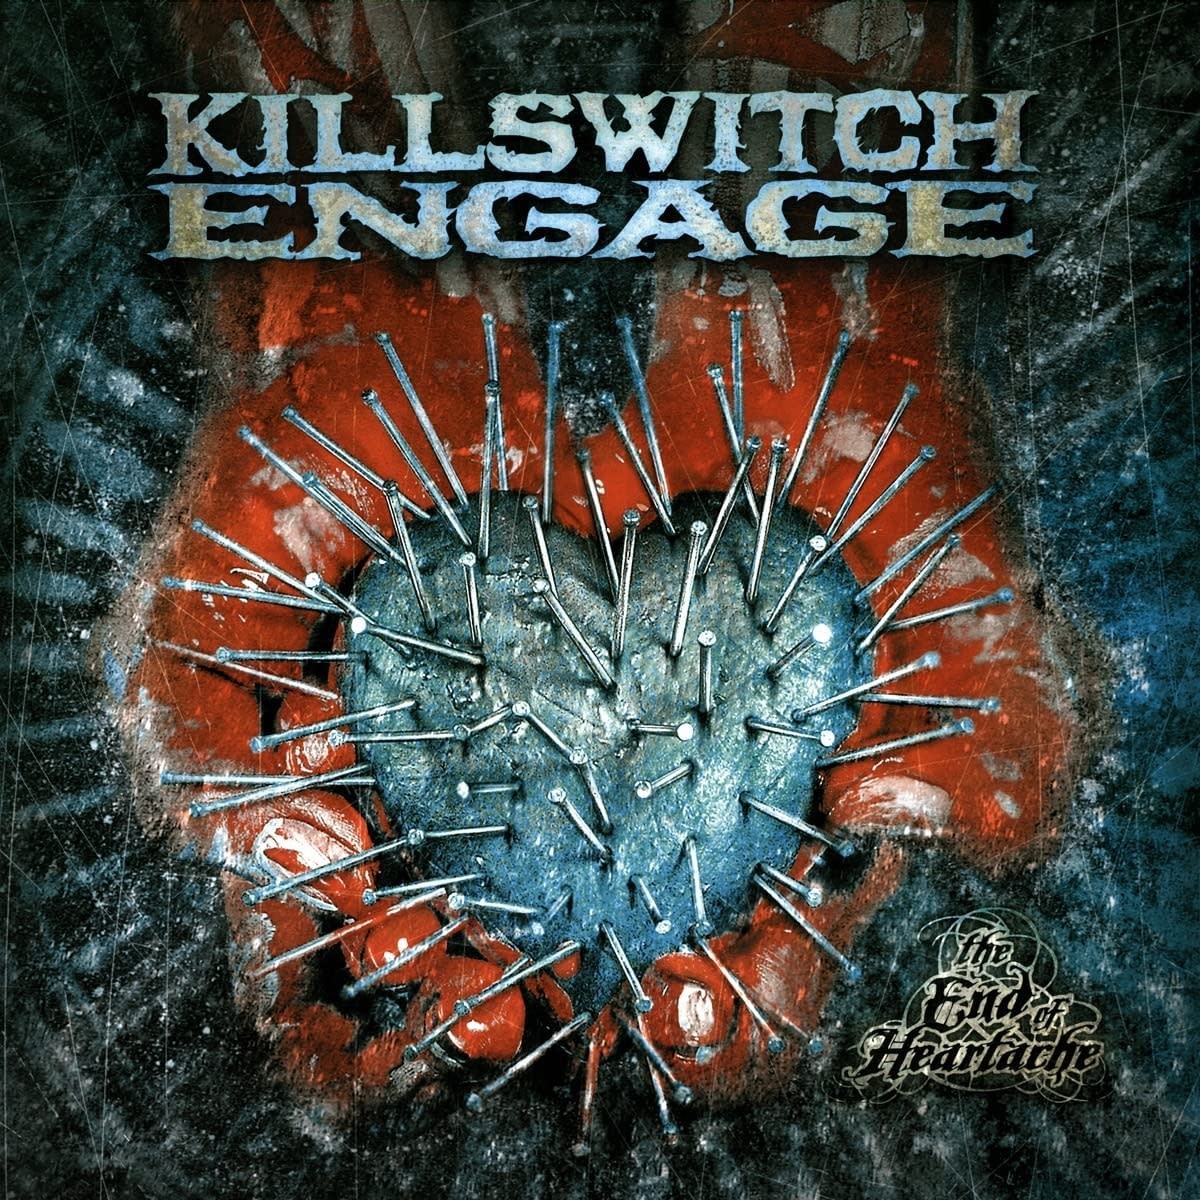 Killswitch Engage – The End Of Heartache